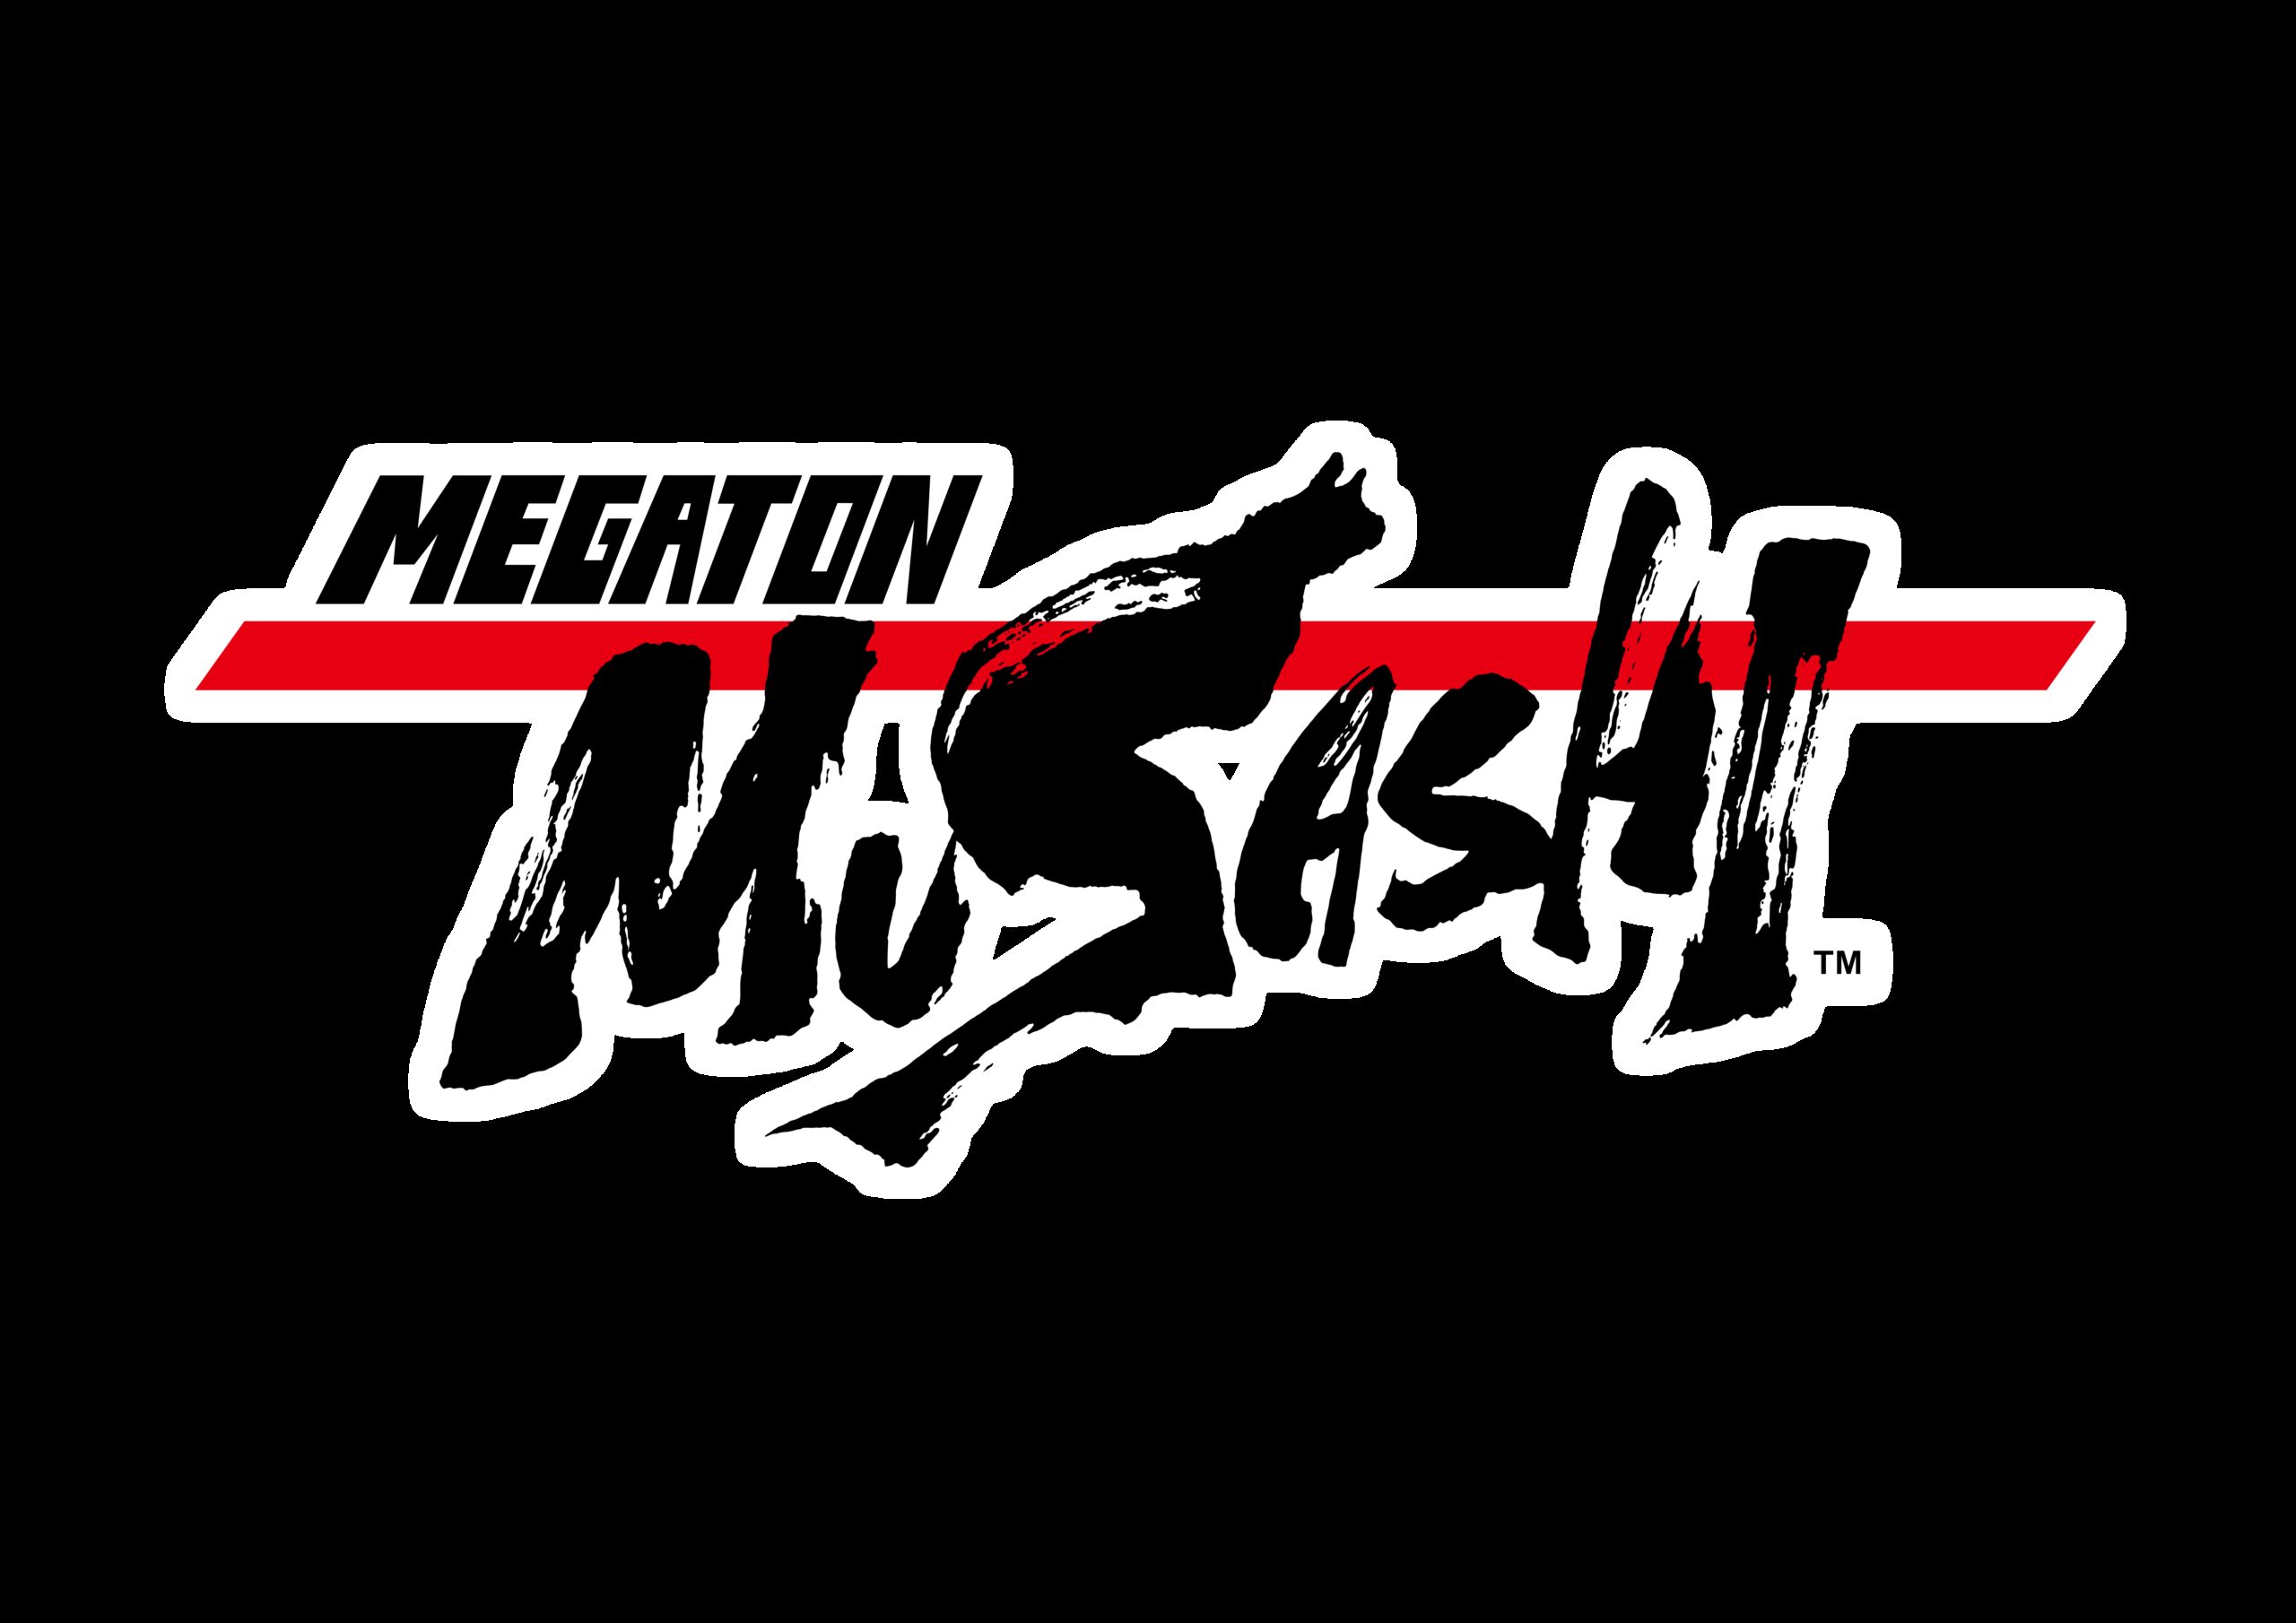 LEVEL5 Inc. Announces a 50% Off Sale for MEGATON MUSASHI W: WIRED on PlayStation